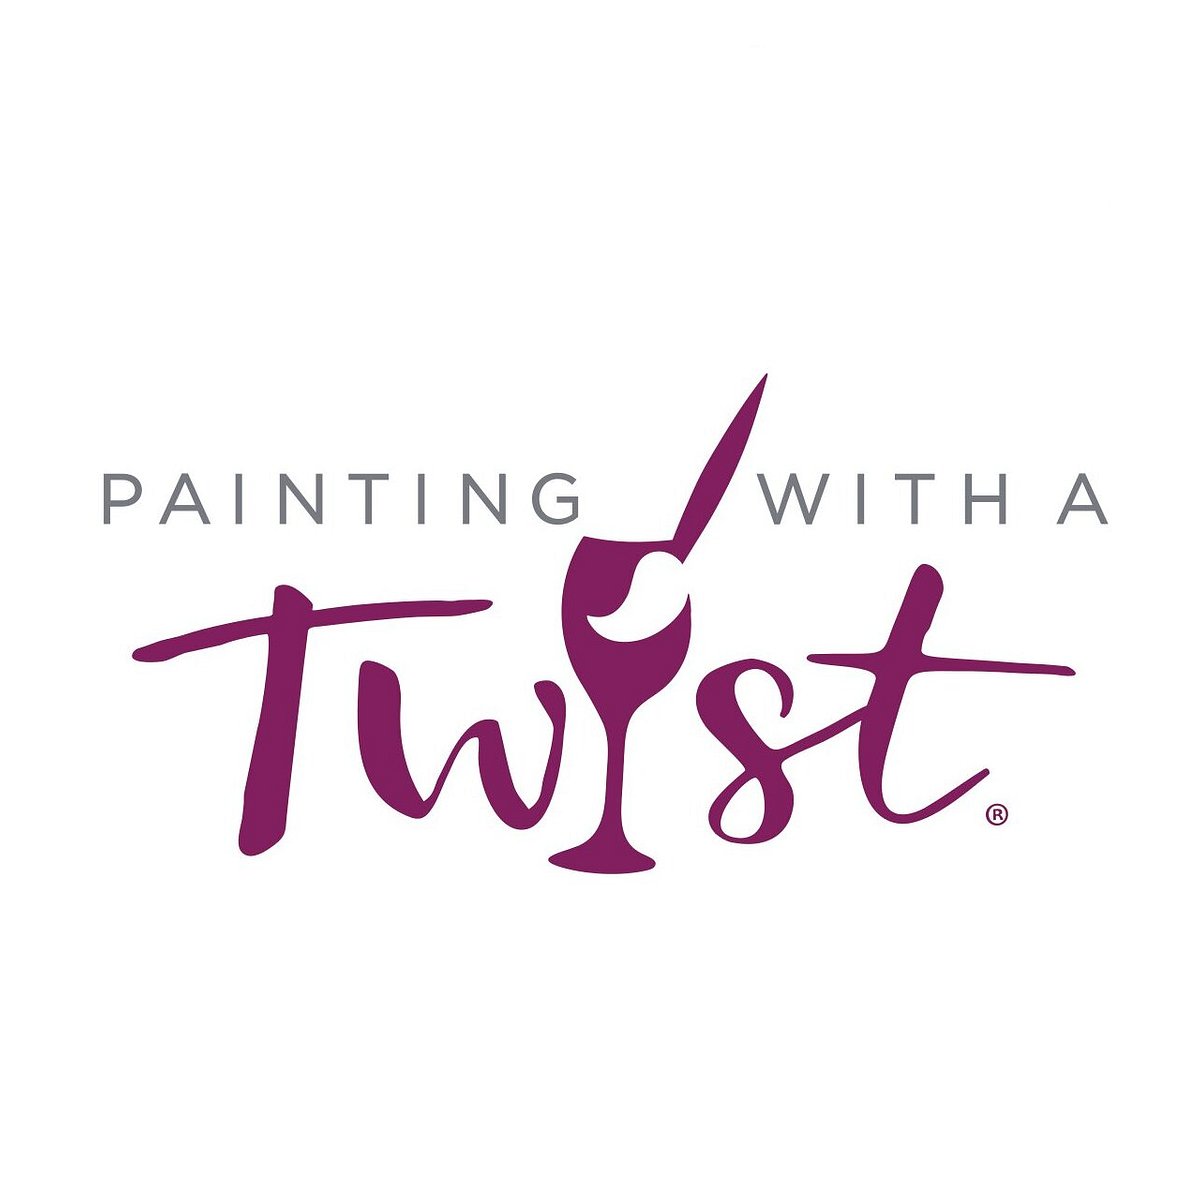 Super Fun Painting with a Twist Experience in Denton, TX